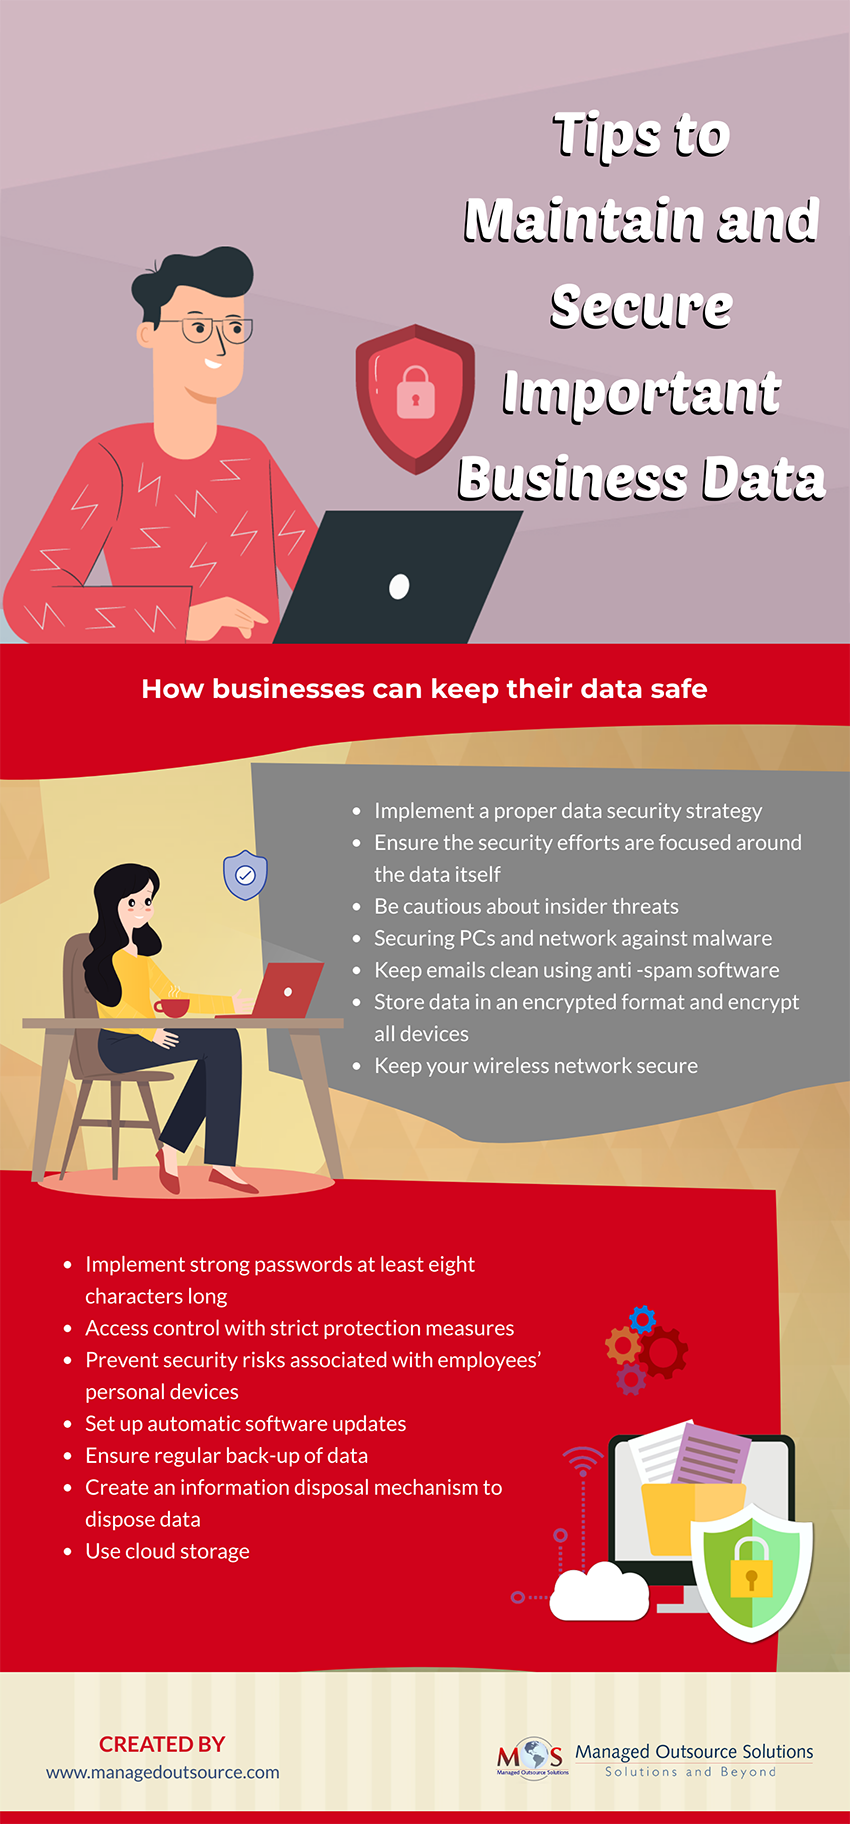 Tips to Maintain and Secure Important Business Data